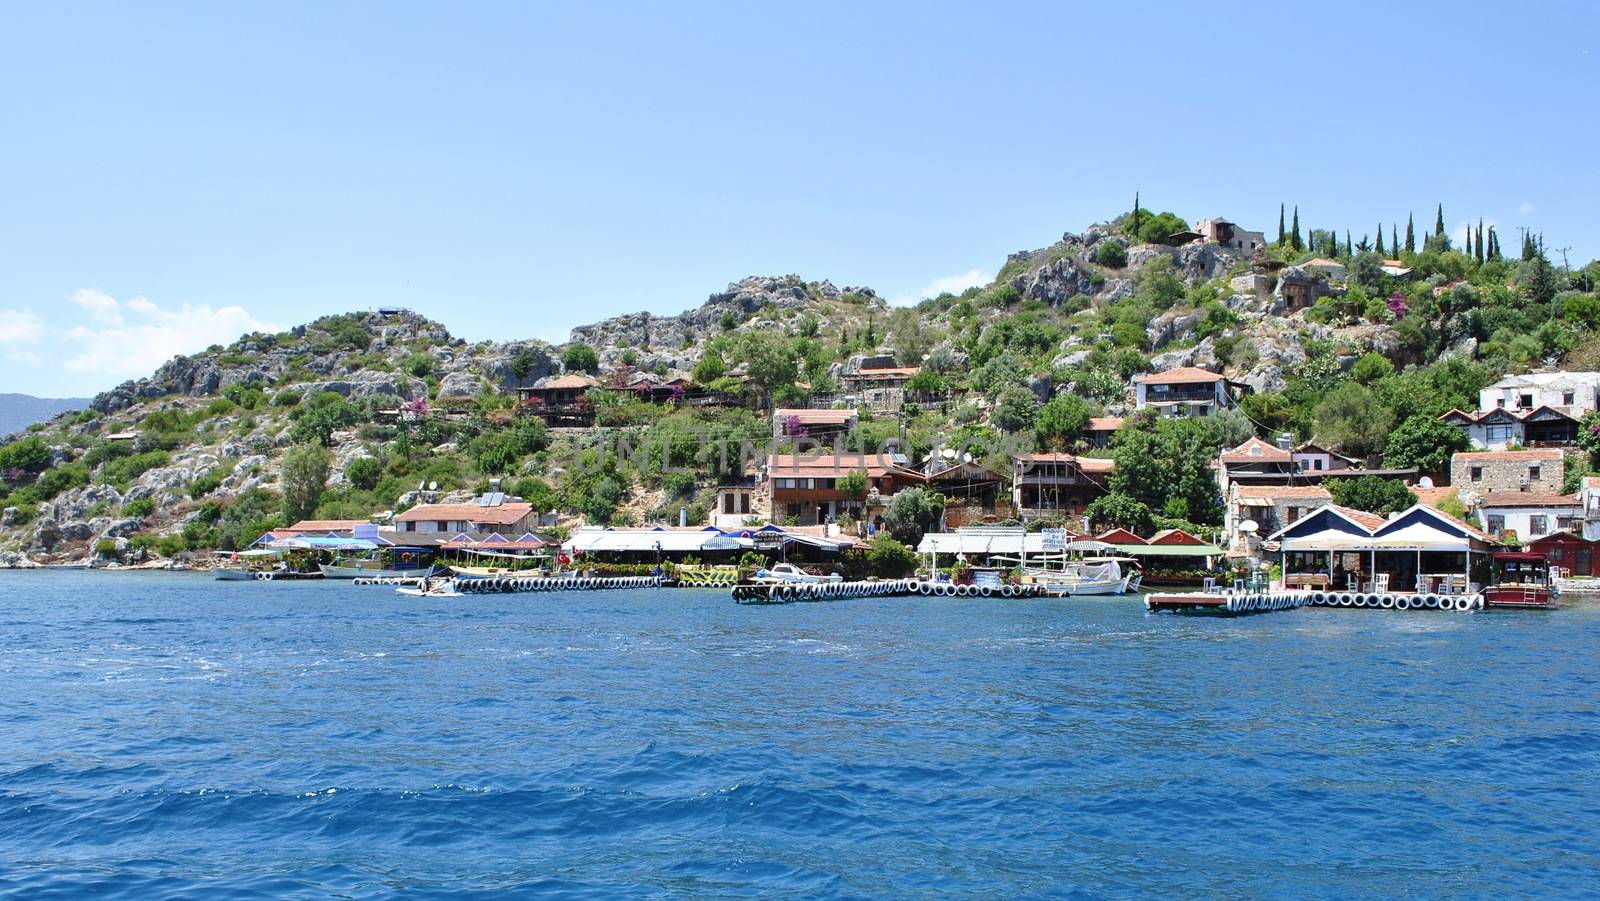 The island on which there are restaurants, cafes and hotels. At one of the Turkish resorts